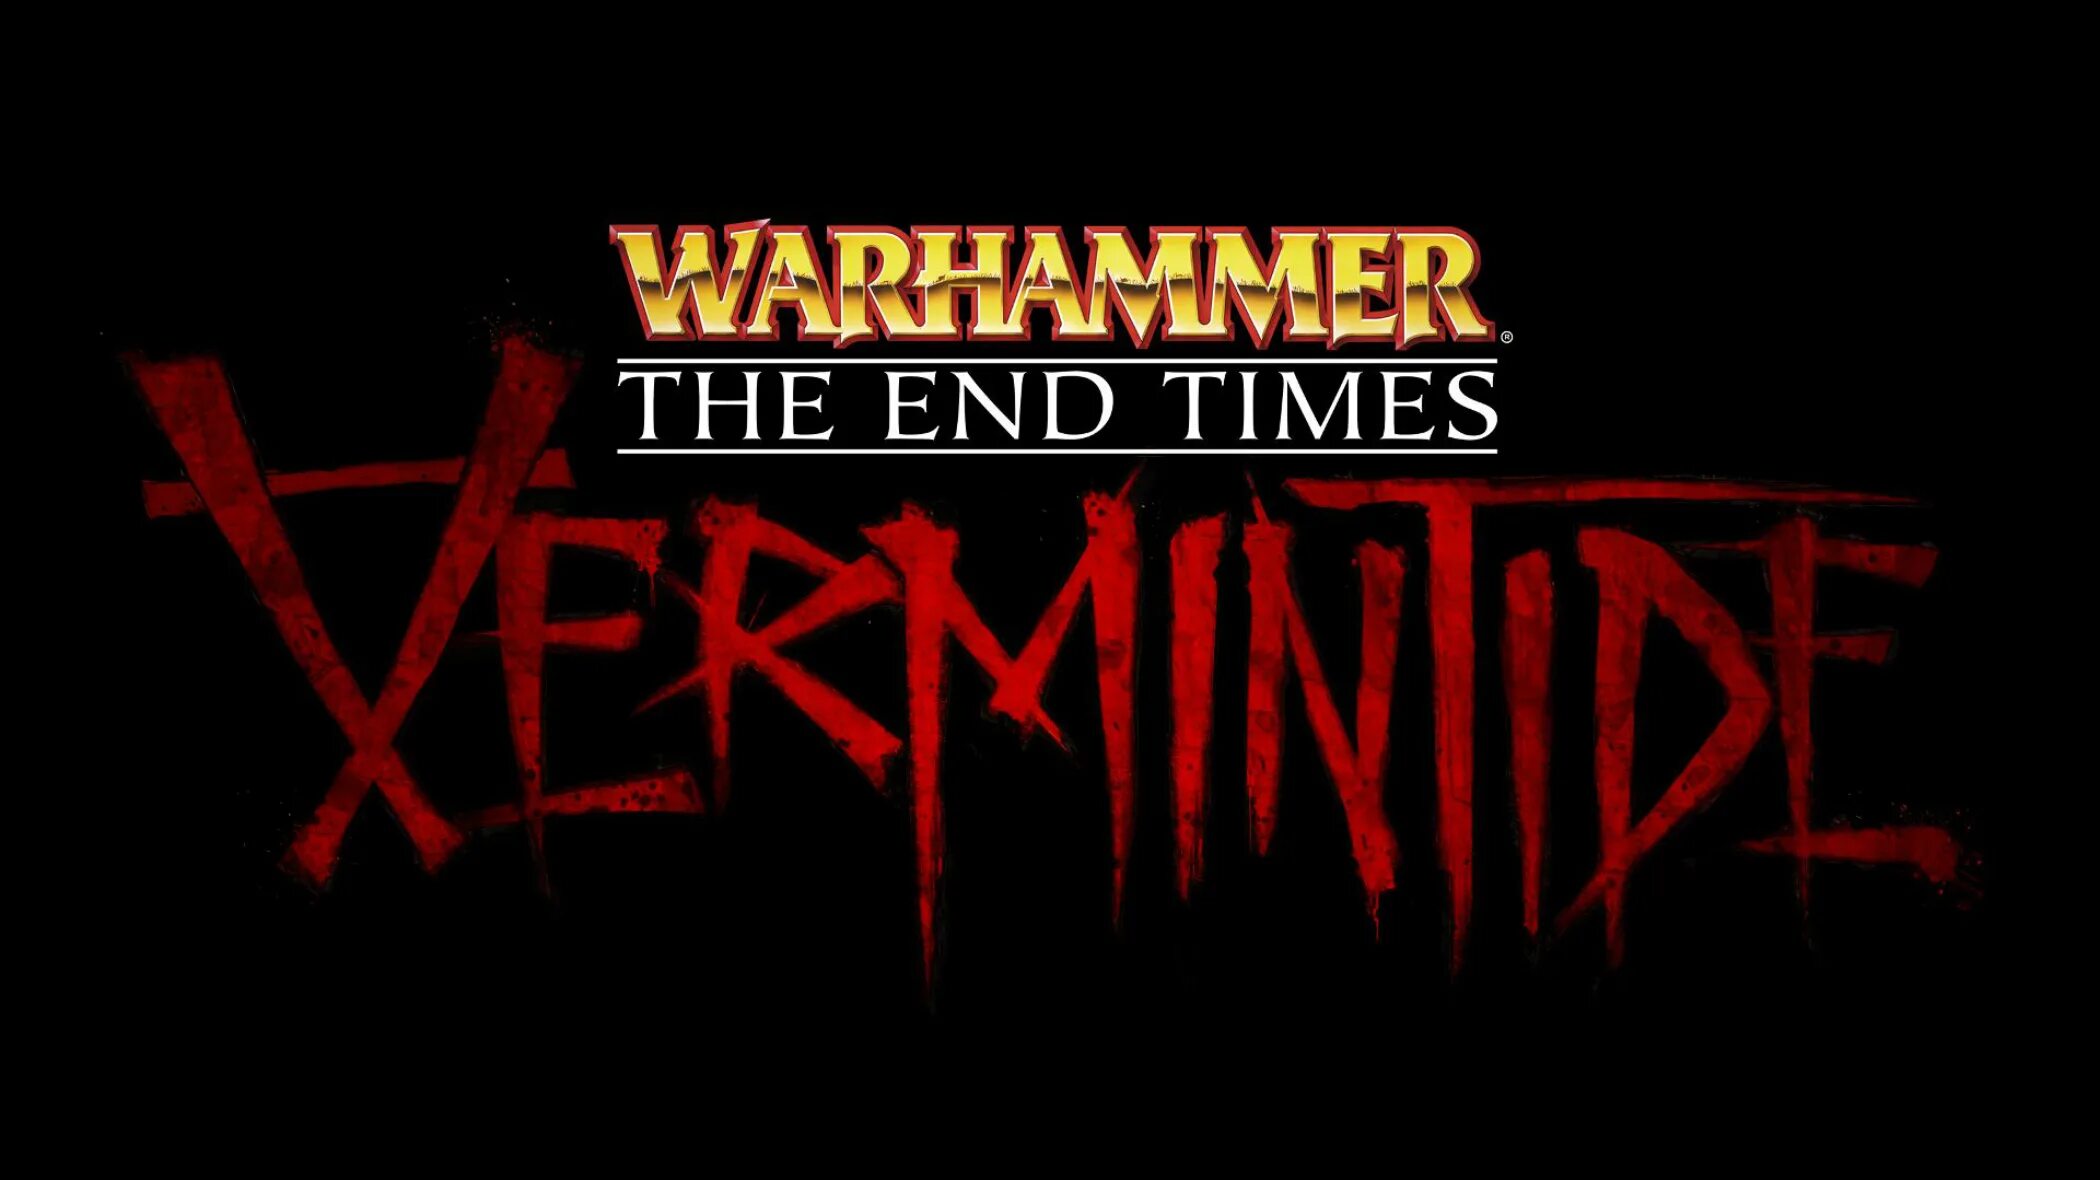 Warhammer: end times - Vermintide. Warhammer end times Vermintide logo. Warhammer: end times - Vermintide обои. Warhammer: Vermintide end times игра обои. When the game ends